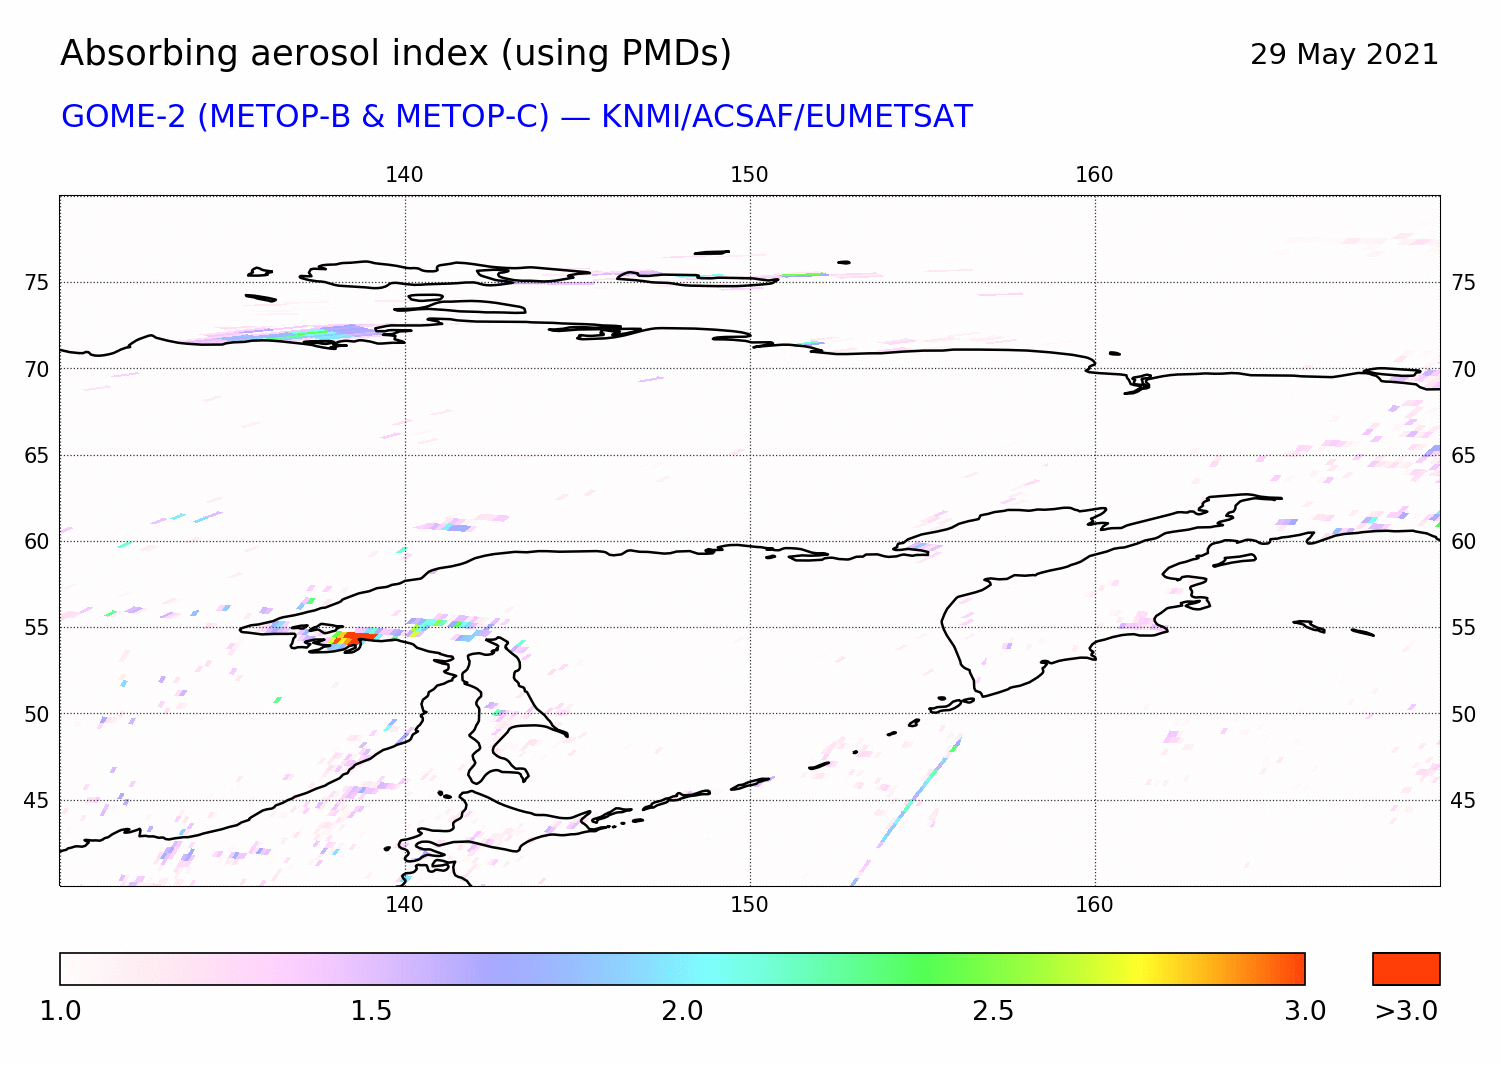 GOME-2 - Absorbing aerosol index of 29 May 2021